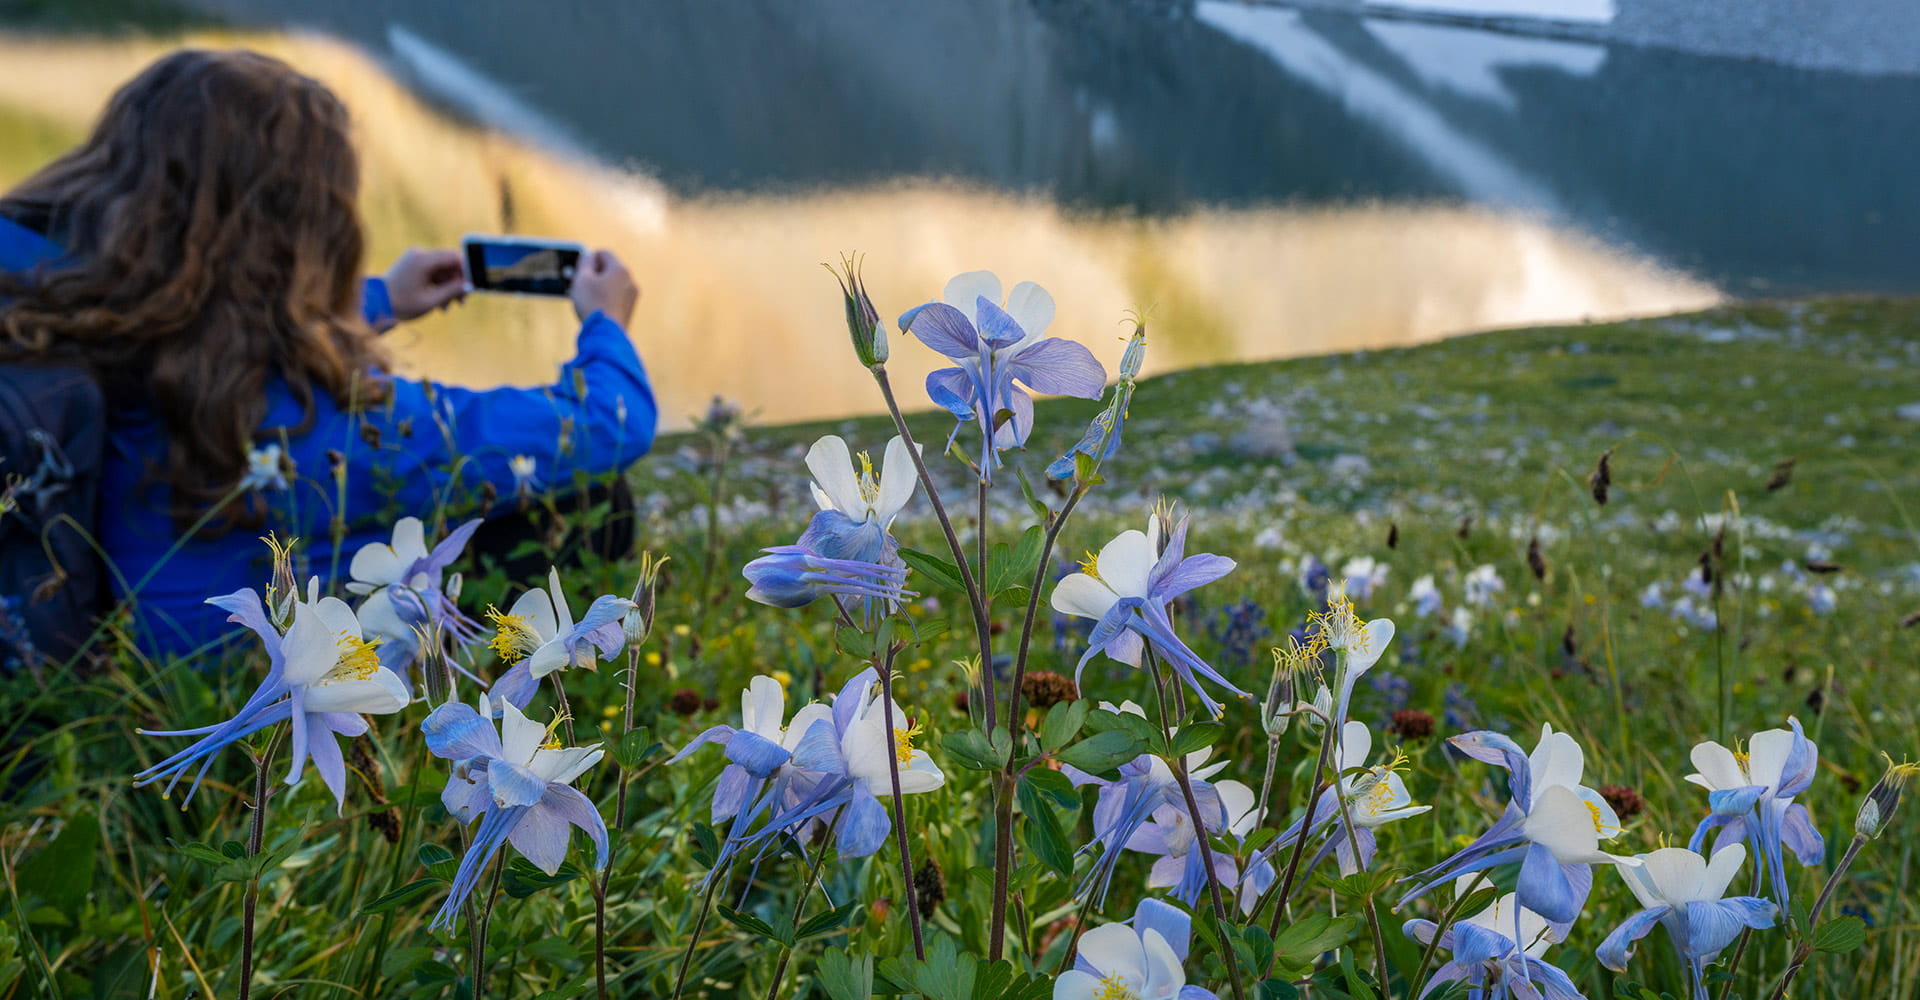 A woman takes pictures of Columbine flowers by an alpine lake near Aspen